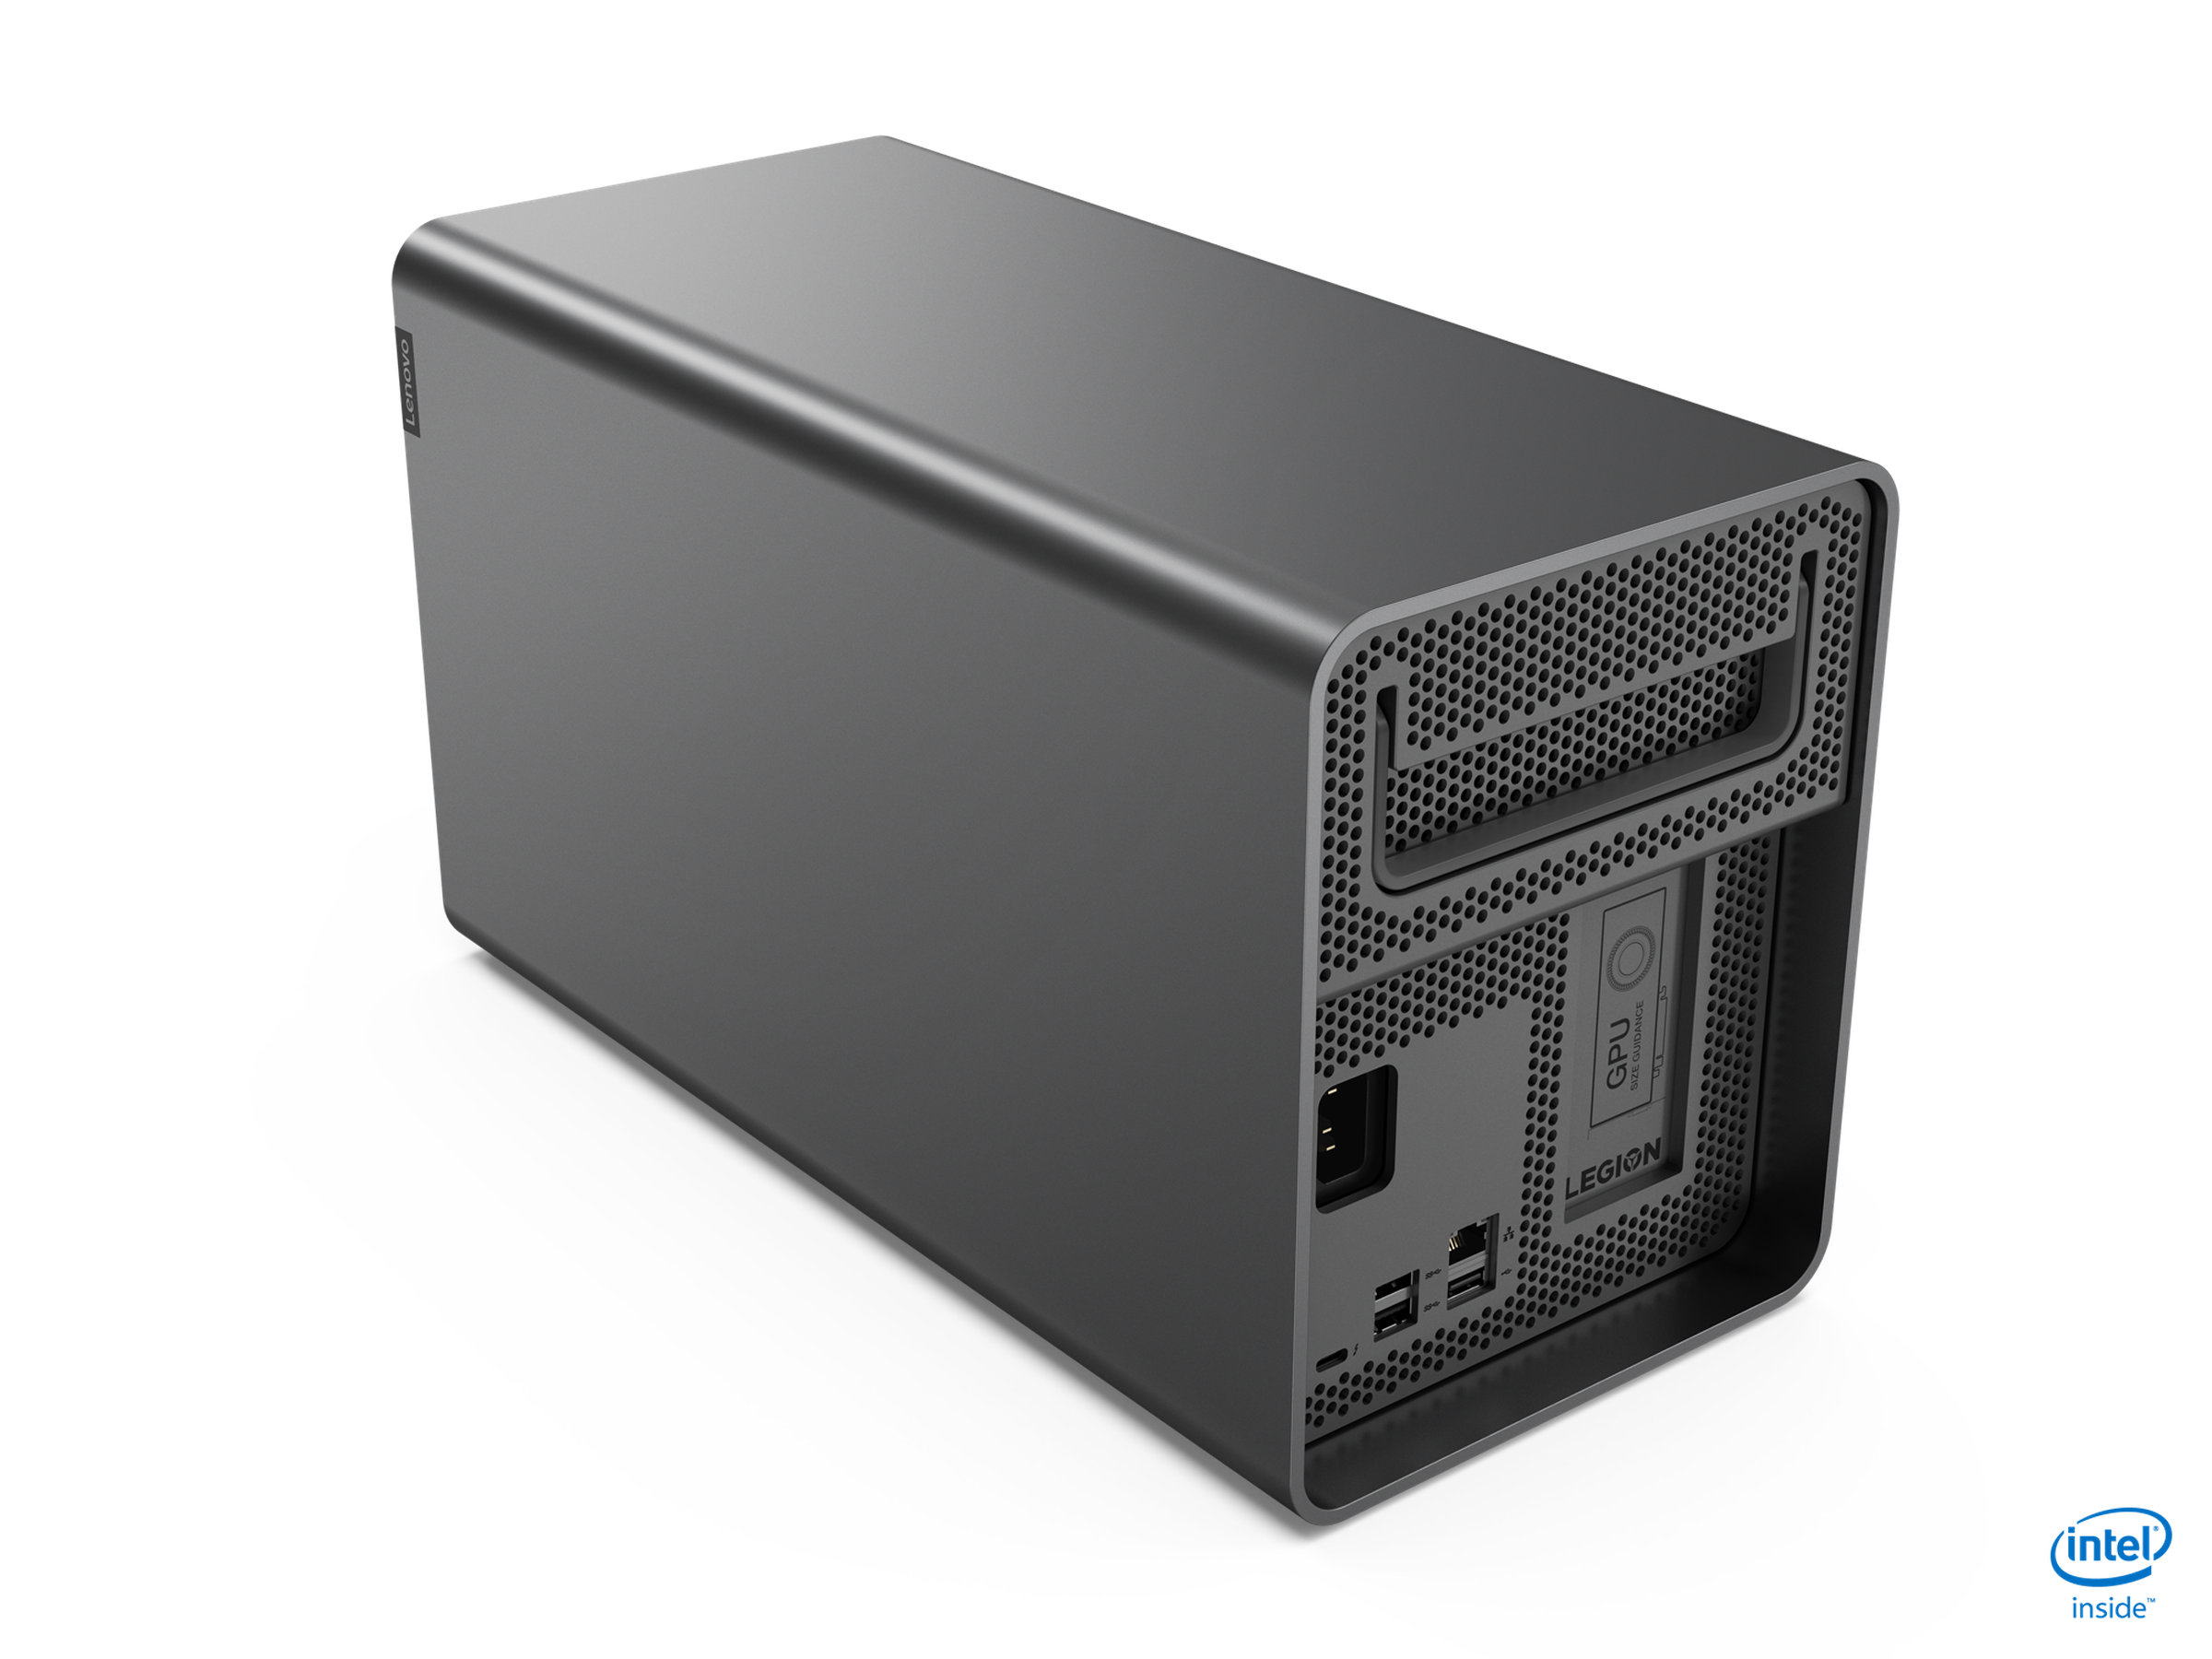 Around the back of the eGPU enclosure you’ll find a selection of USB ports and an Ethernet jack.